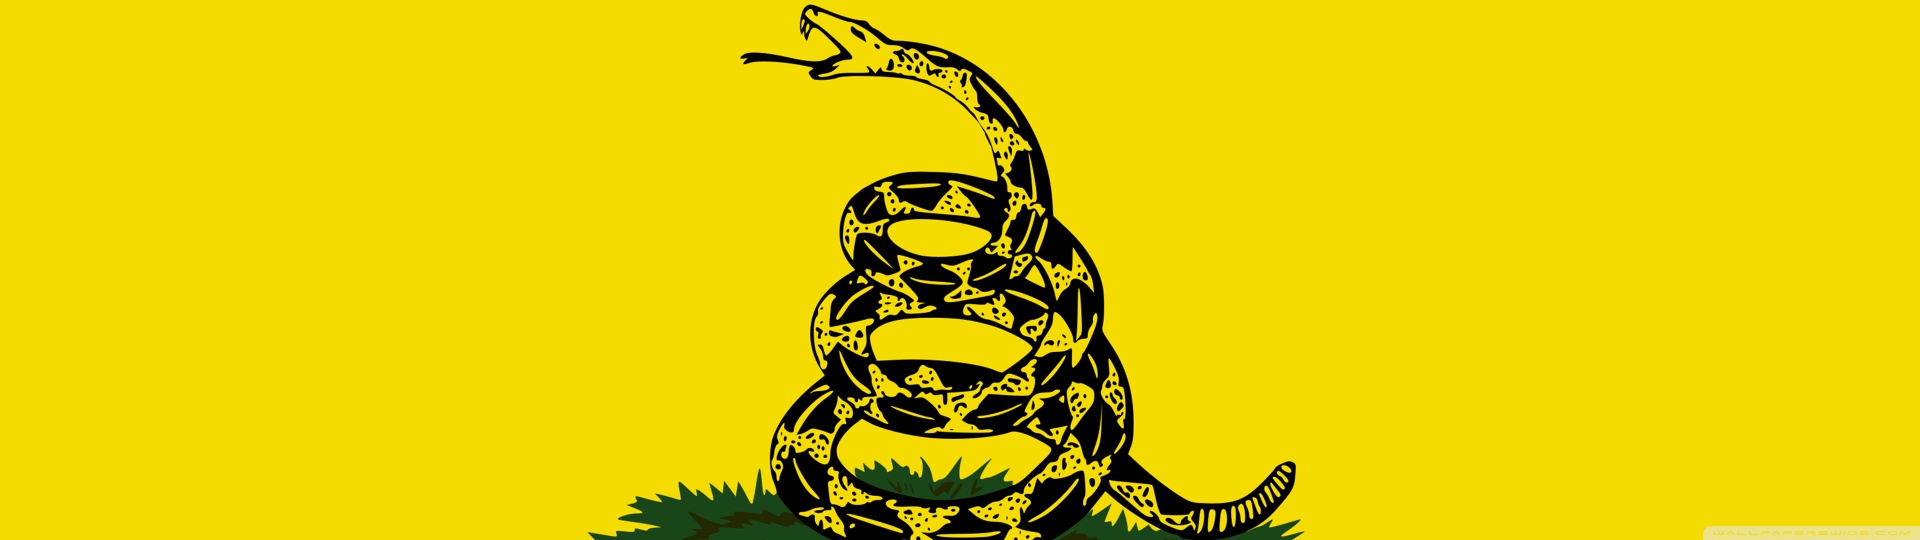 Don't Tread On Me Wallpapers Group (40+). 